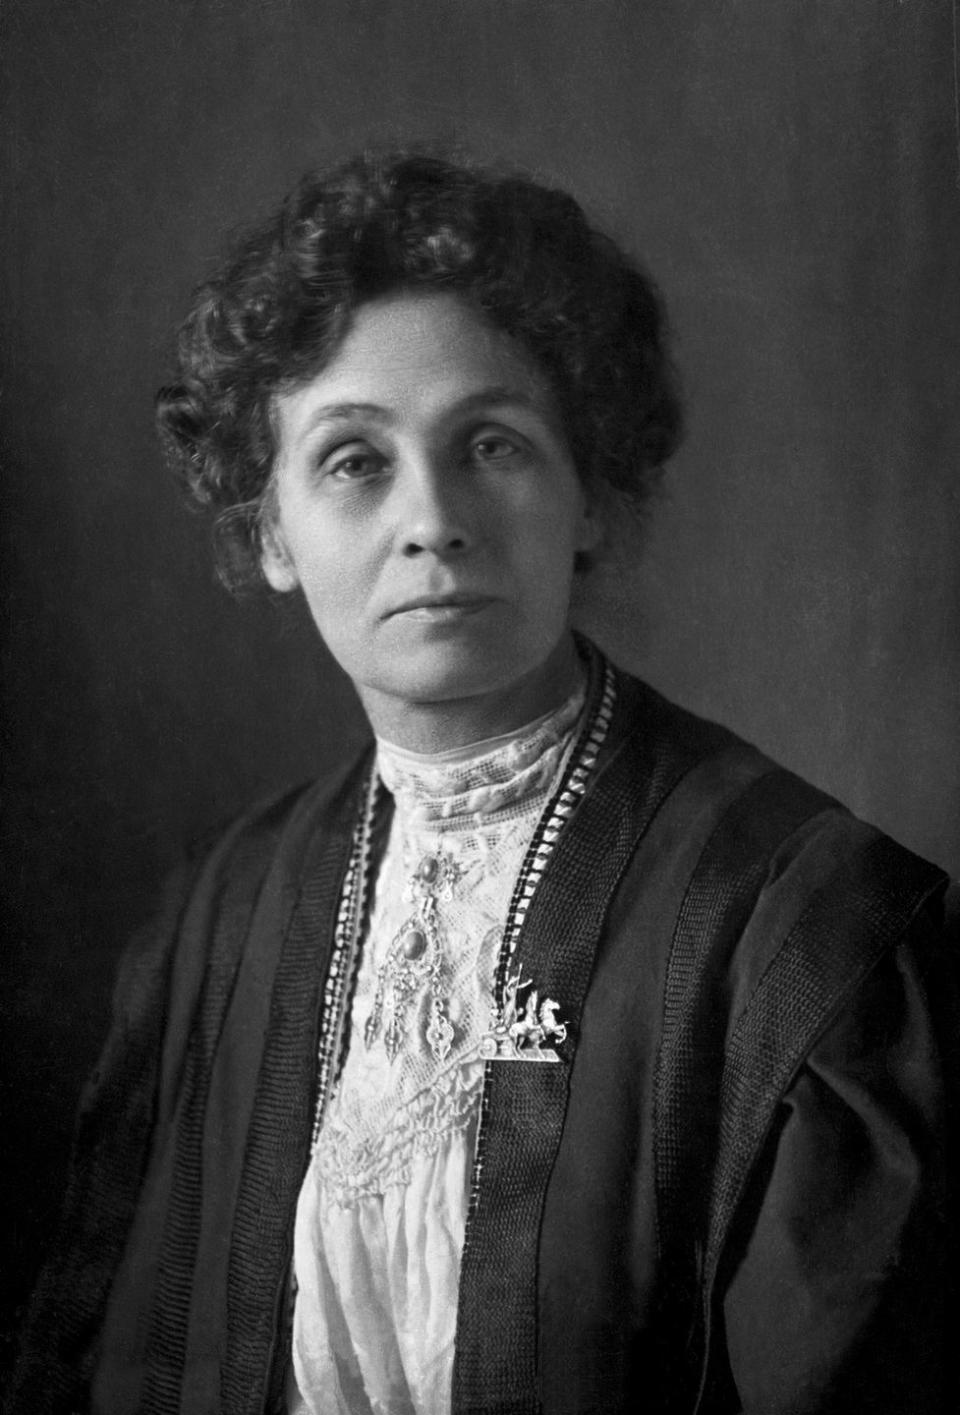 <p>British political activist, Emmeline Panklhurst was a prominent figure in the British suffragette movement - earning women the right to vote. Panklhurst also founded the Women's Social and Political Union in 1903.</p>